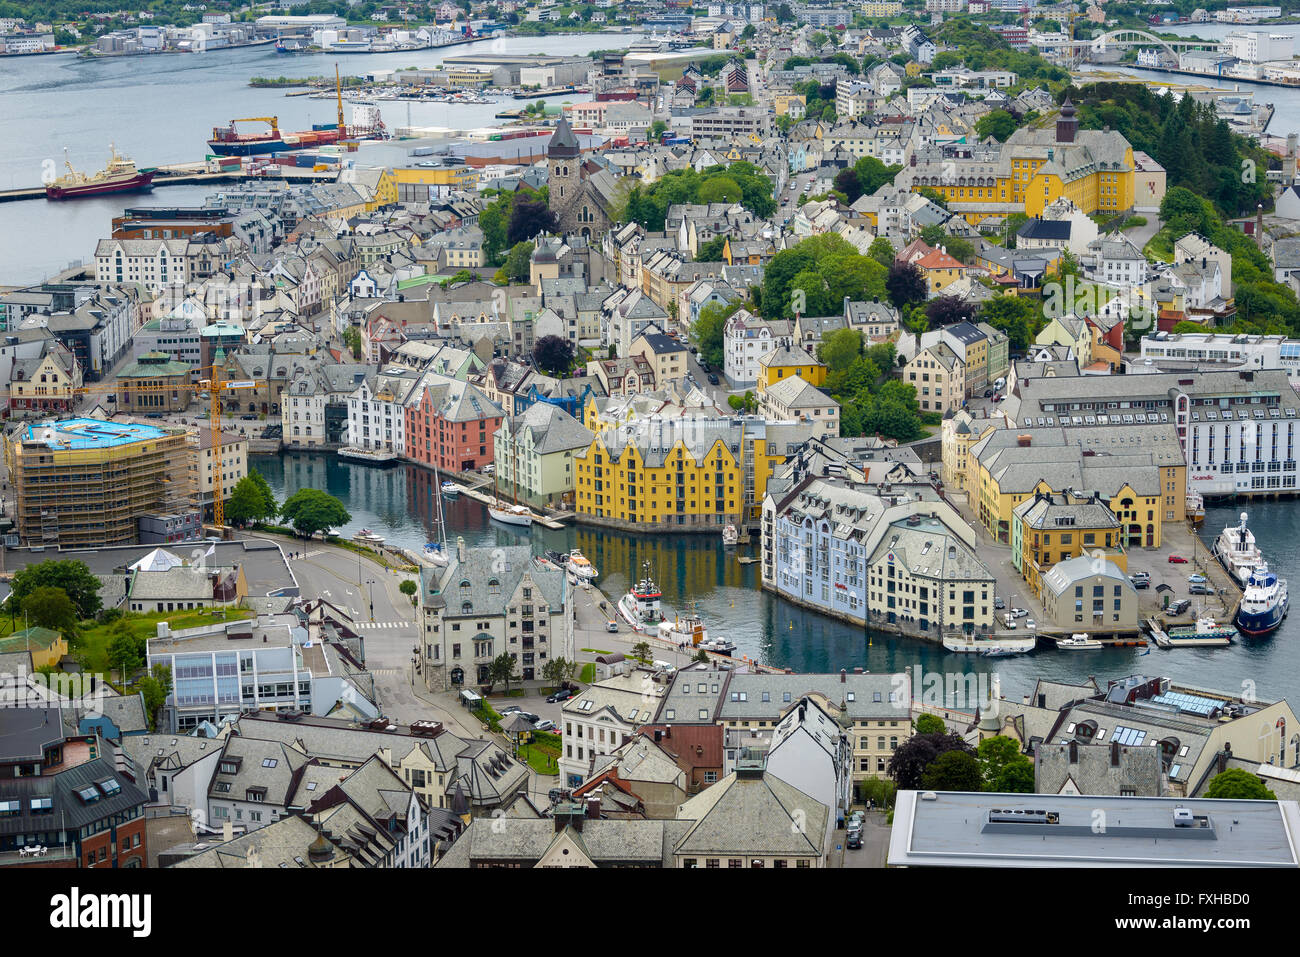 Aerial view over the colorful Art Nouveau architecture of the city of Ålesund, located on islands at the west coast of Norway. Stock Photo